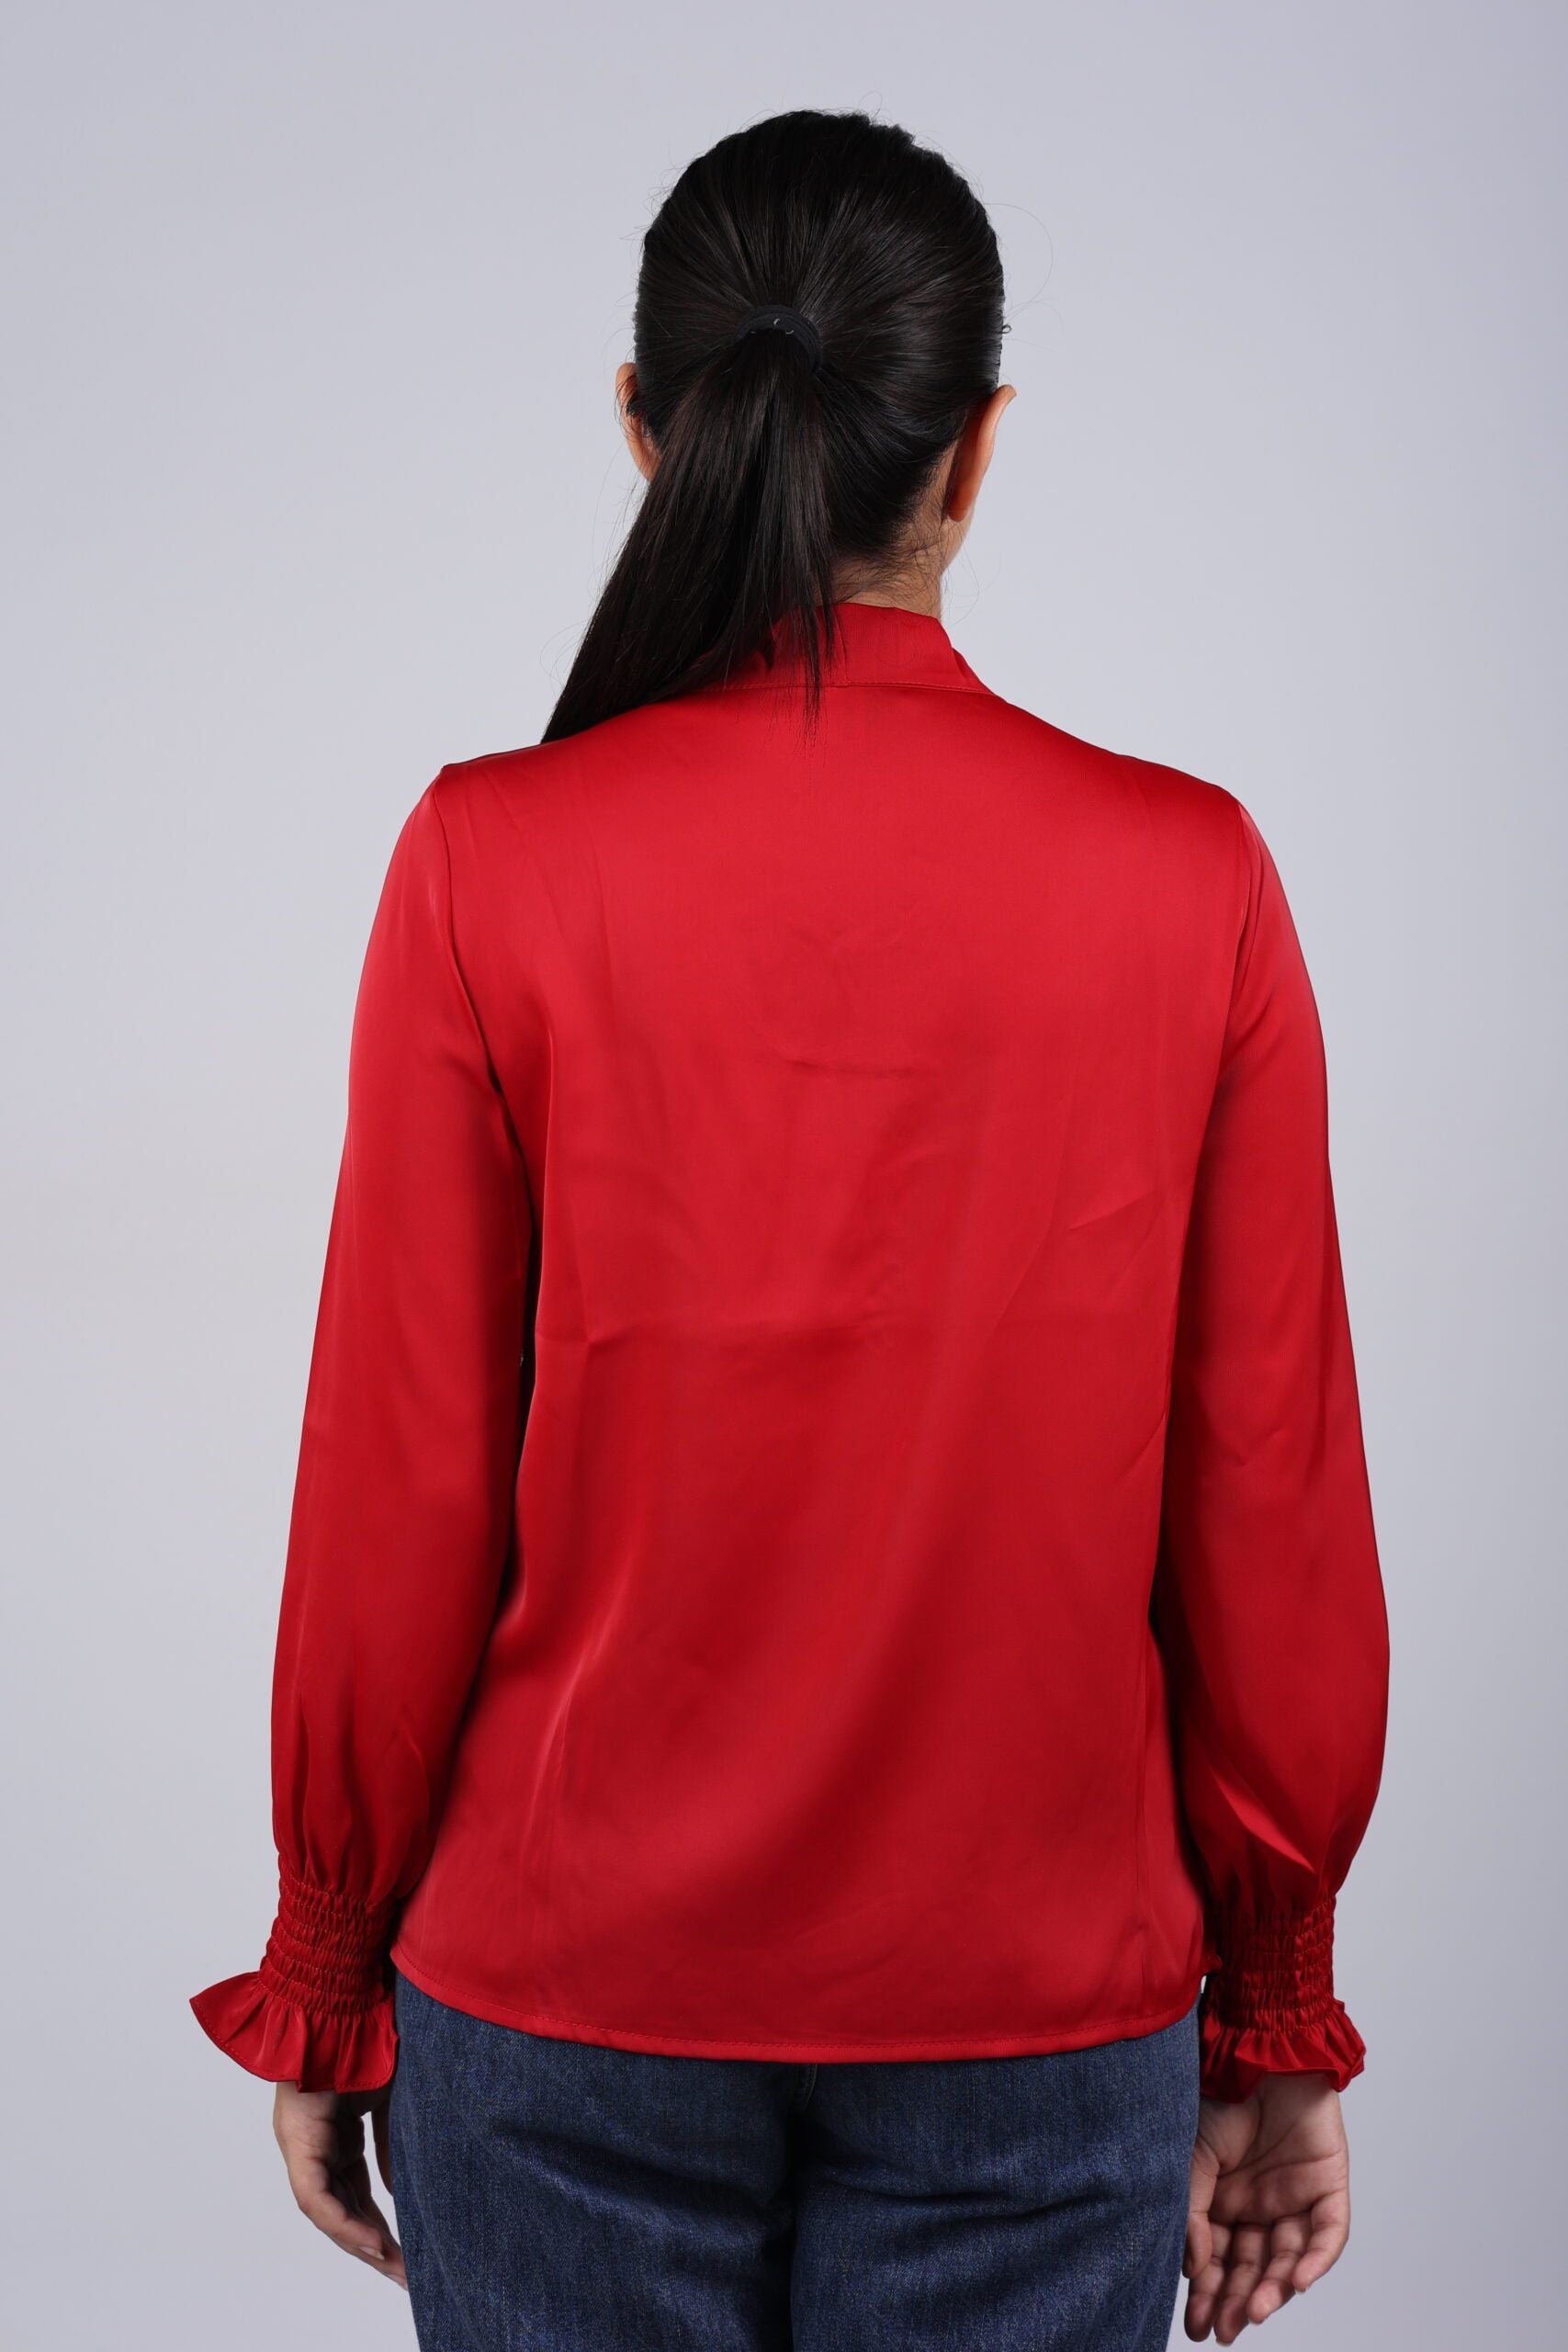 Front Rose Formal/Casual Top (Red) A Stunning Blend of Elegance and Versatility!